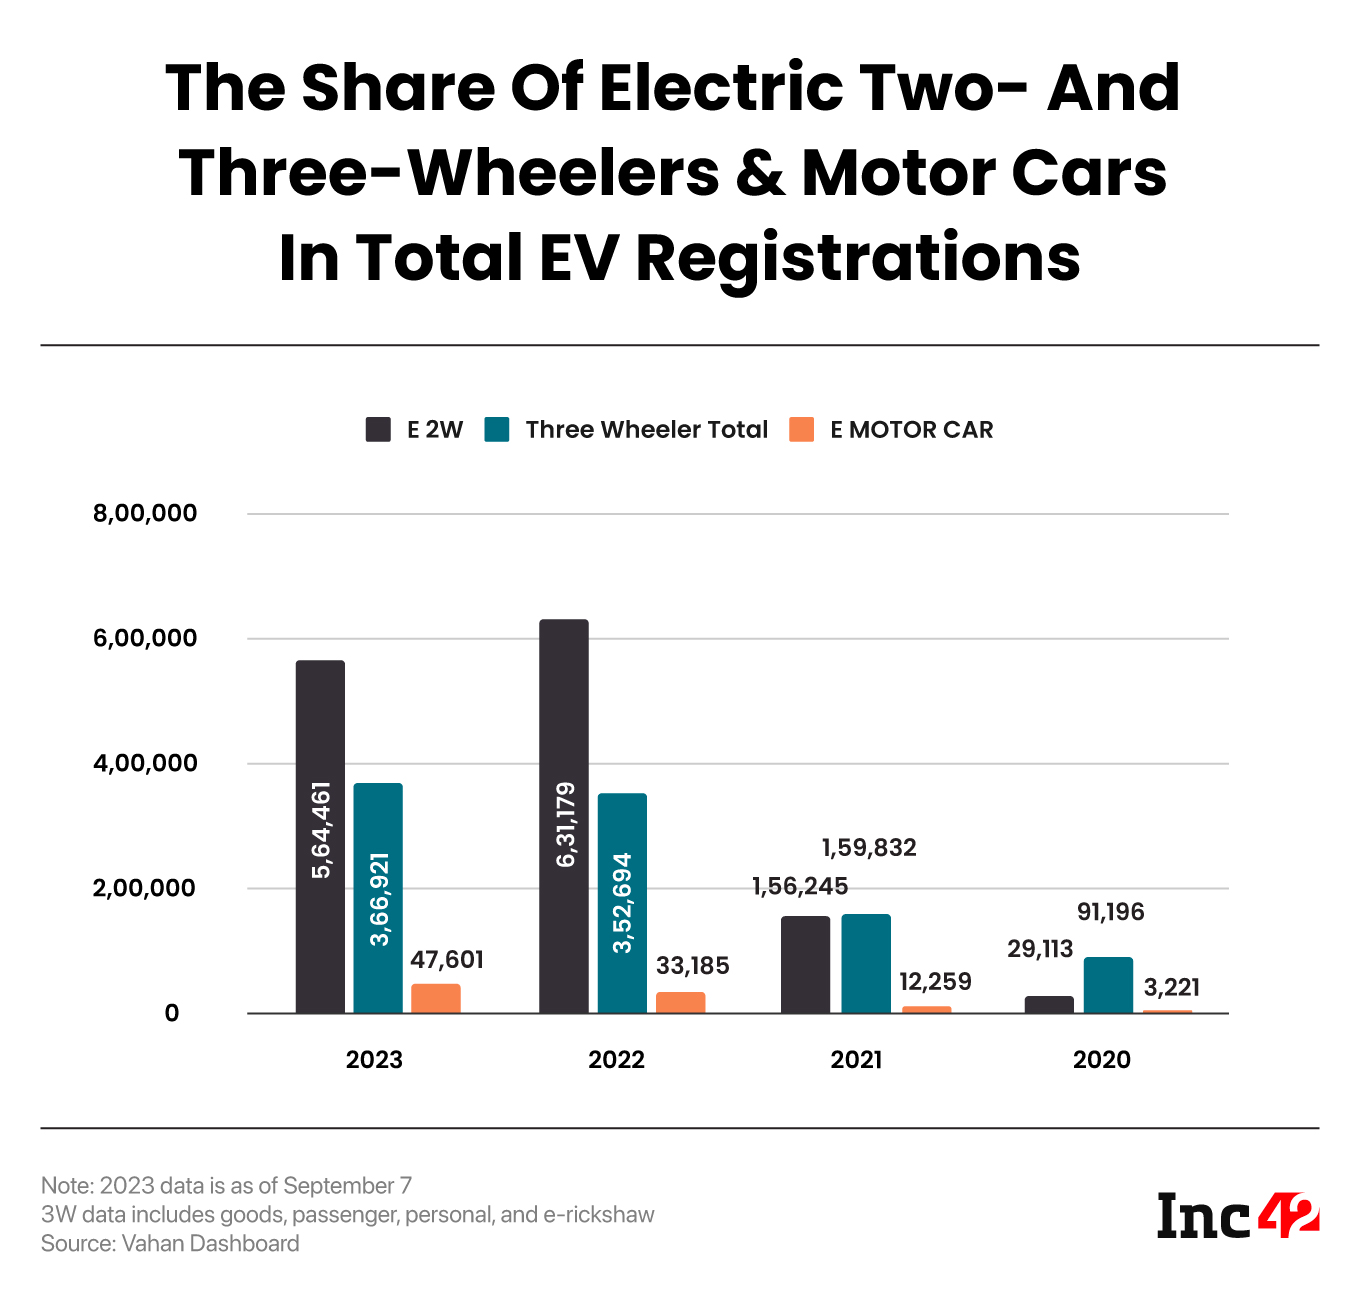 The Share Of Electric Two- And Three-Wheelers & Motor Cars In Total EV Registrations